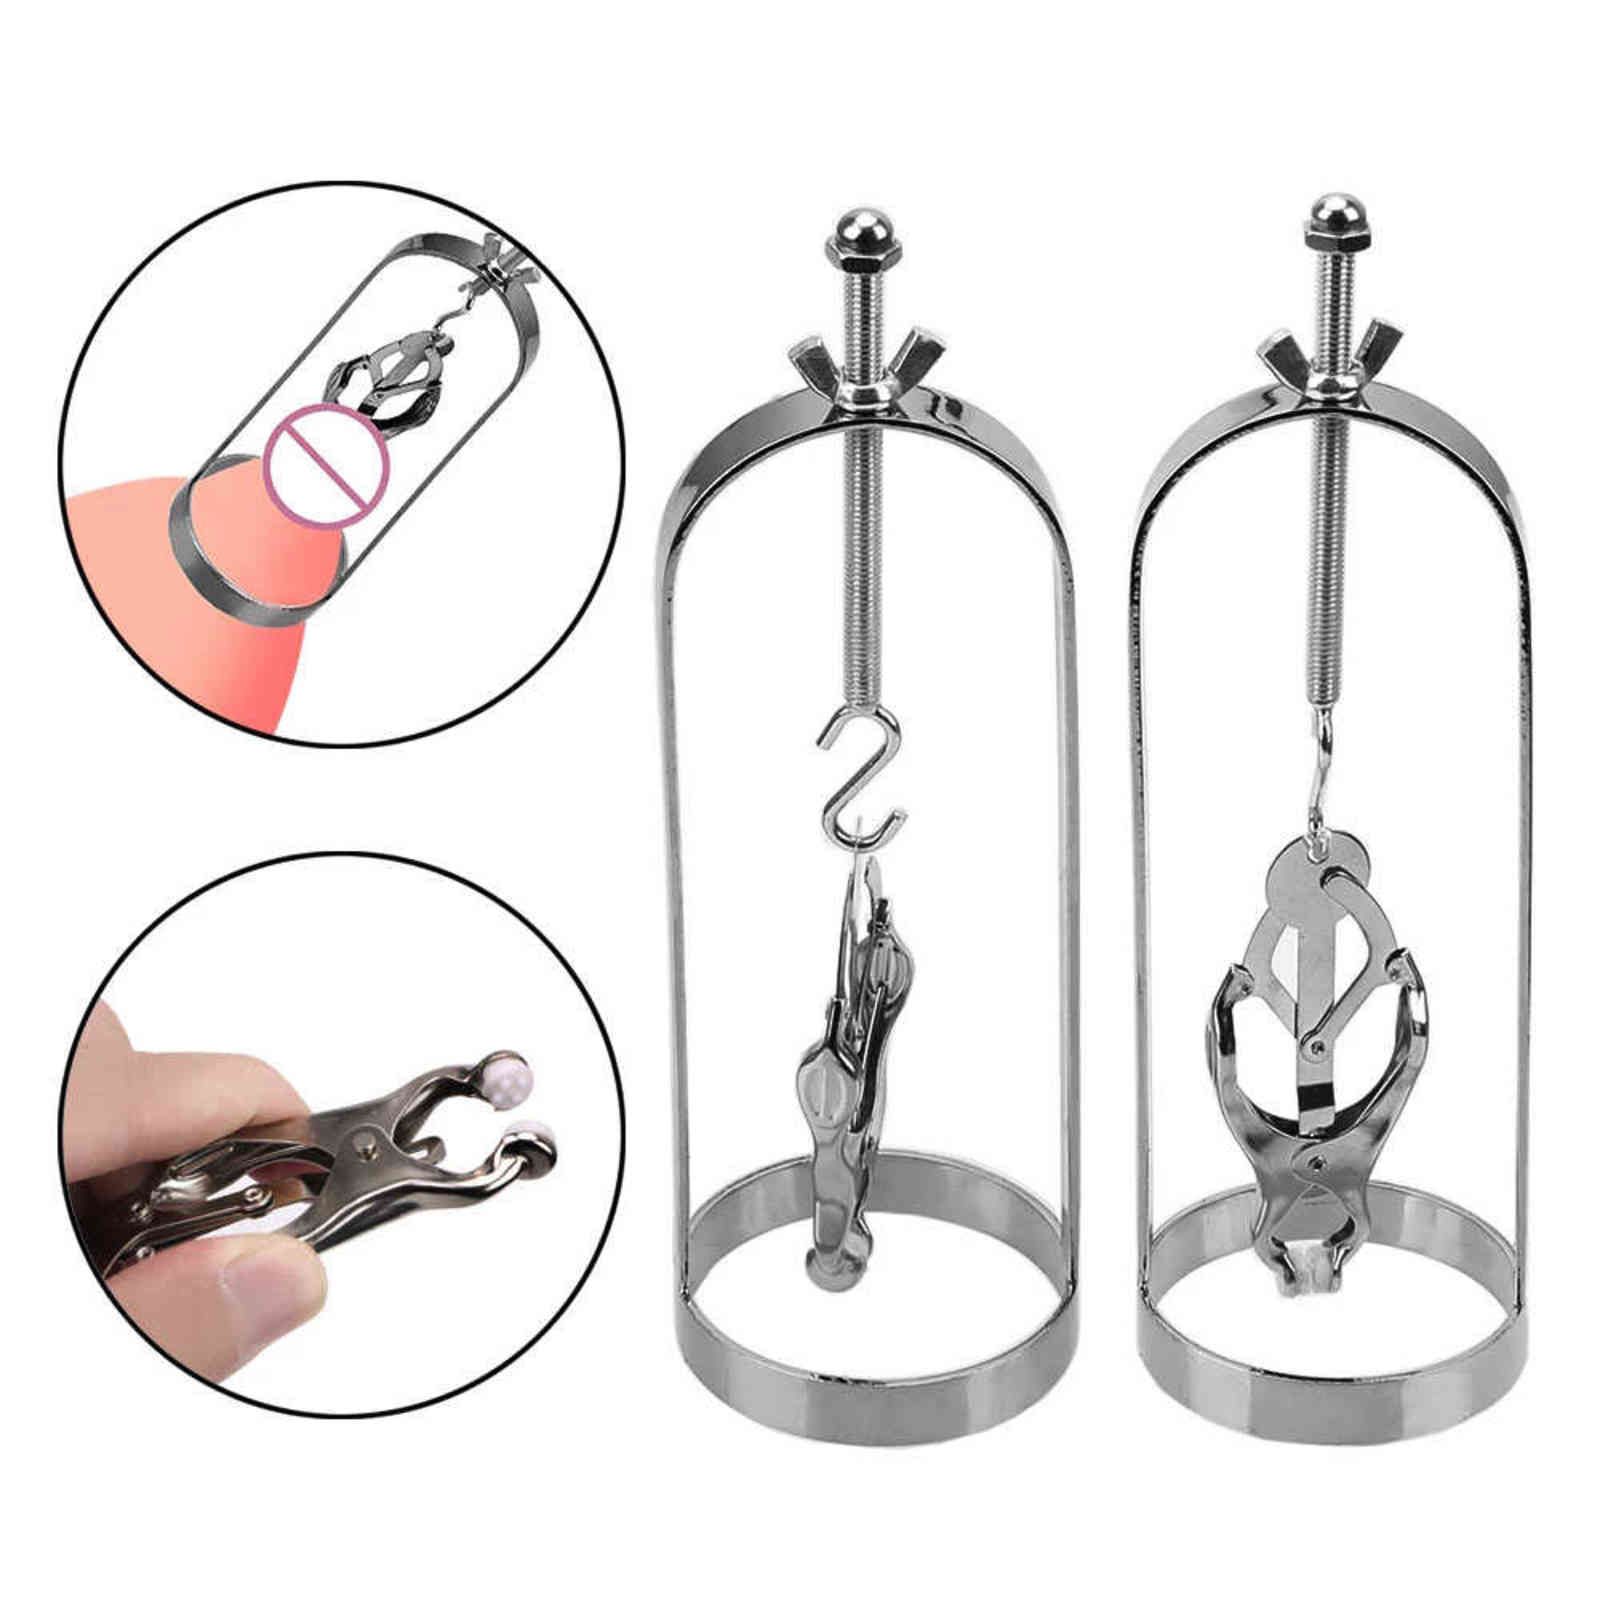 NXY Pump Toys Adjustable Metal Breast Massager Nipple Clips Bondage Stimulator Torture Play Clamps Retention Device Sex For Women 1125 From Analtoys, $10.26 DHgate photo pic